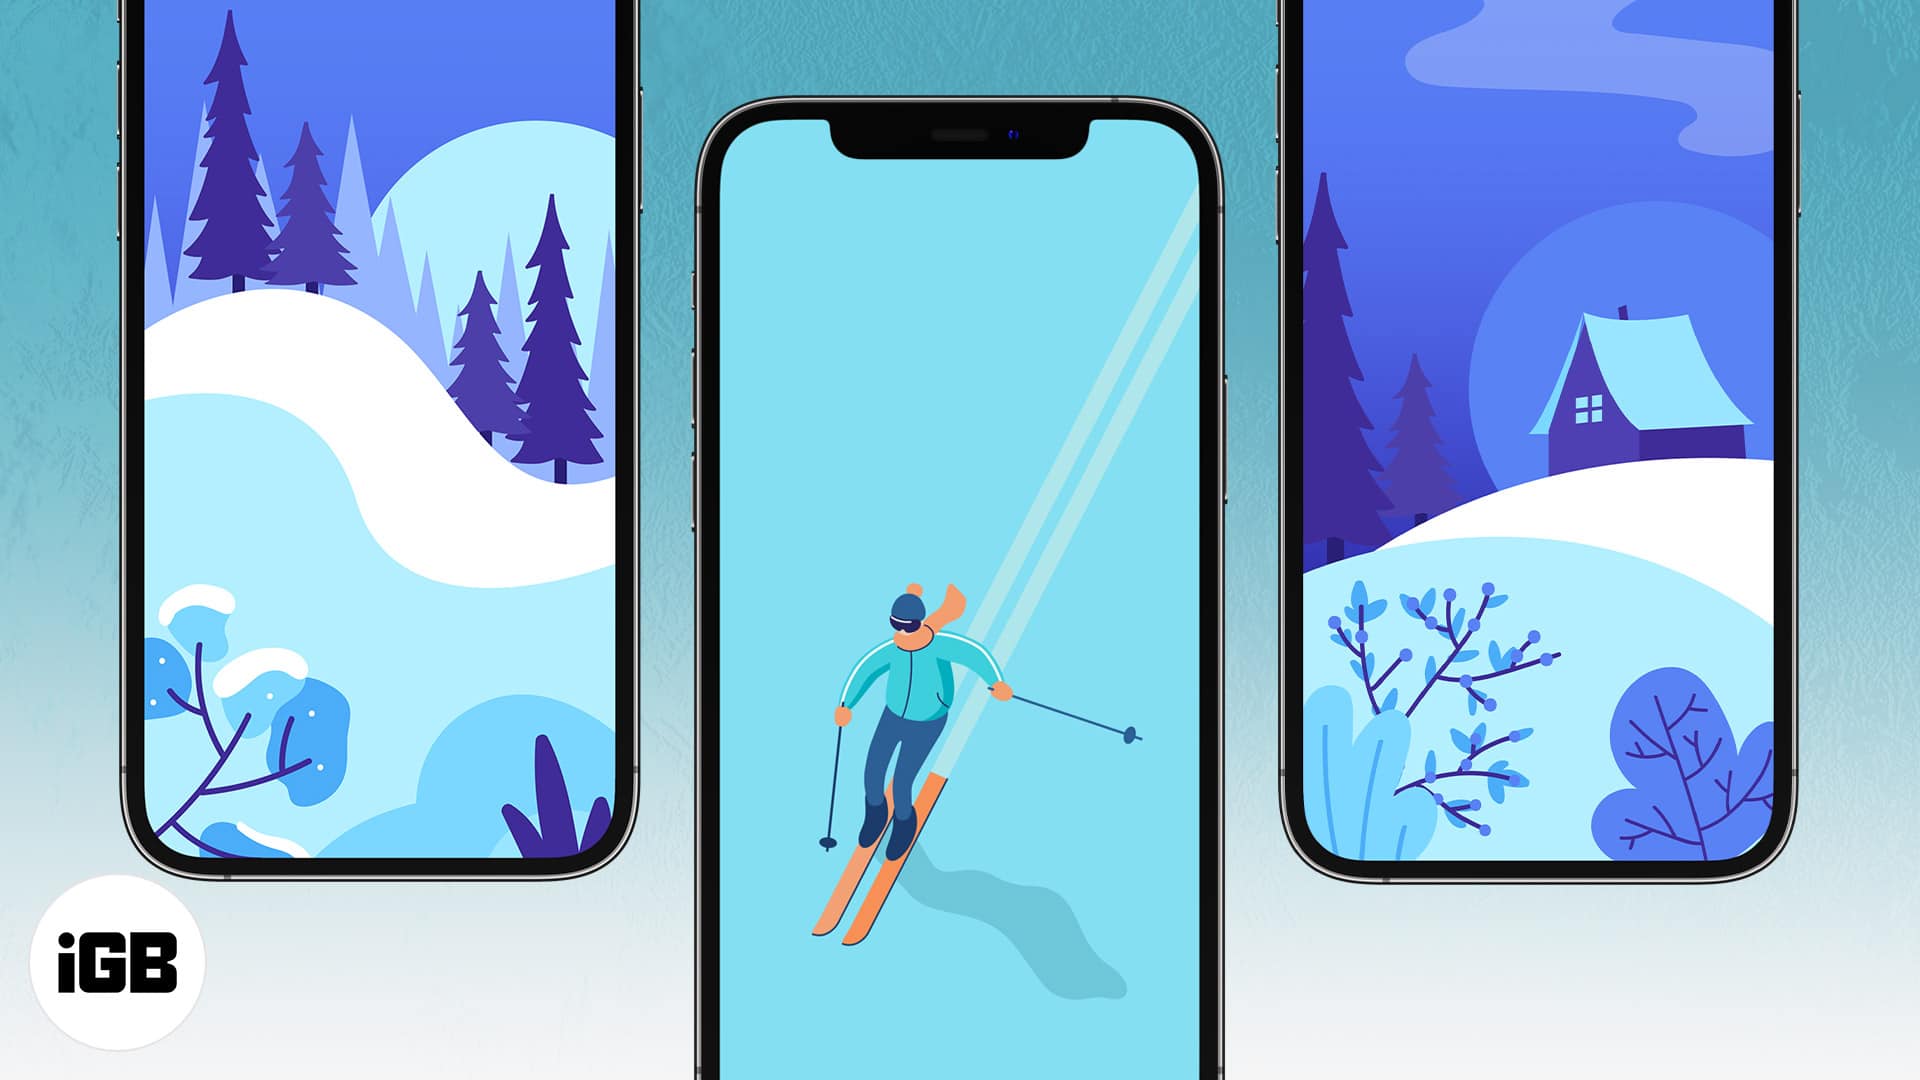 13 Cozy winter wallpapers for iPhone in 2022 download 1920x1080.